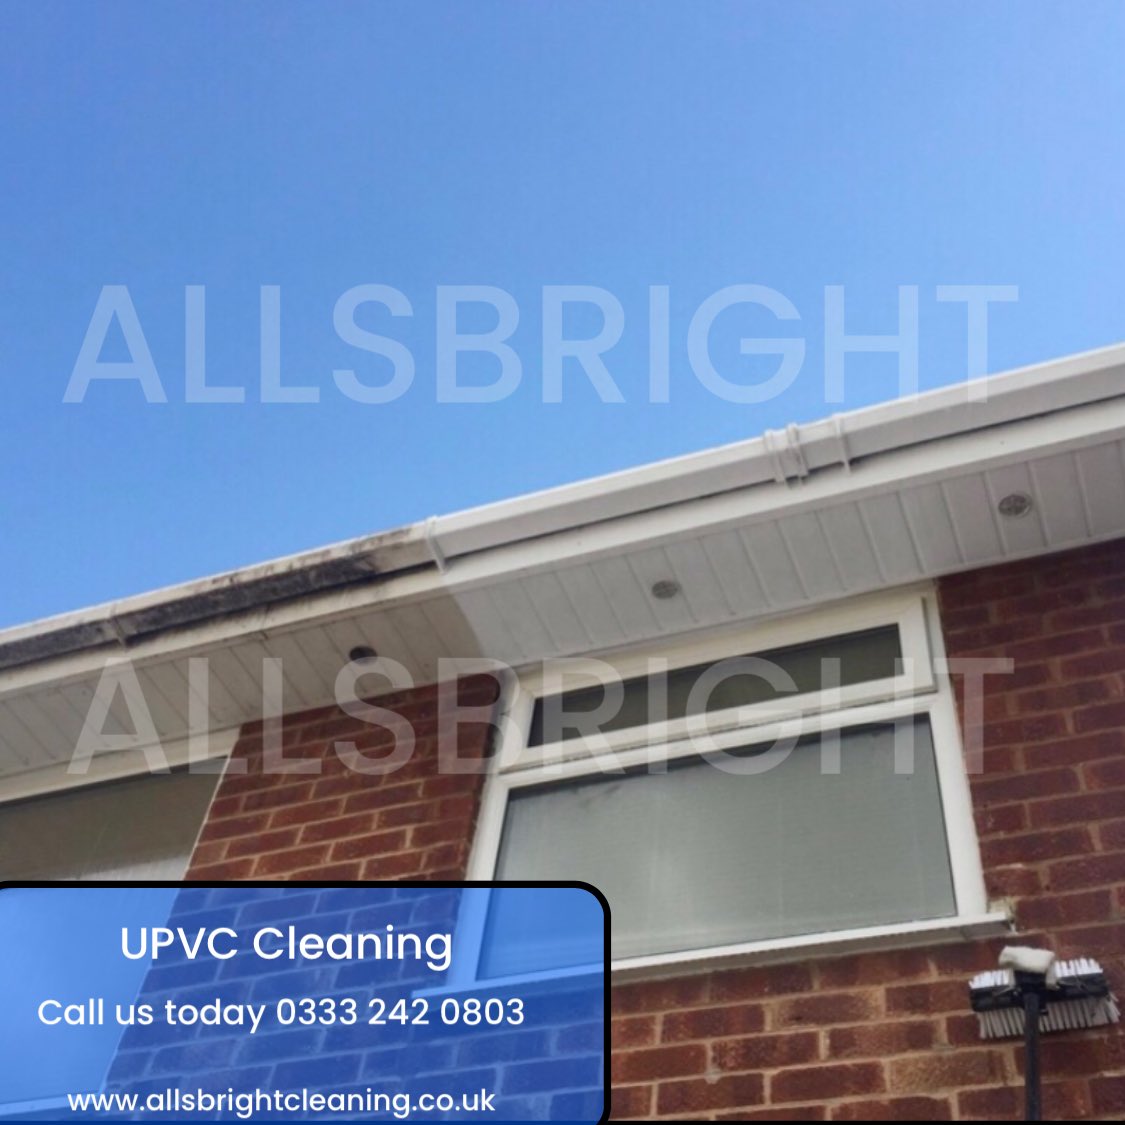 Our UPVC cleans can transform the look of your home 🏡 

Call us today 📞 

#cardiff #abergavenny #cwmbran #exteriorclean #domesticclean #render #rendercleaning